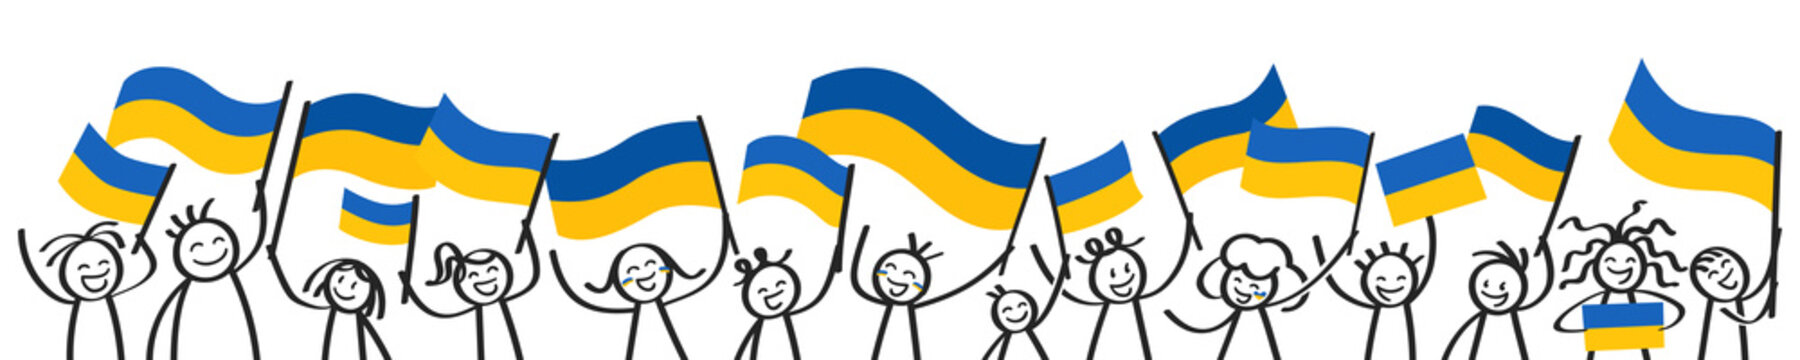 Cheering crowd of happy stick figures with Ukrainian national flags, smiling Ukraine supporters, sports fans isolated on white background